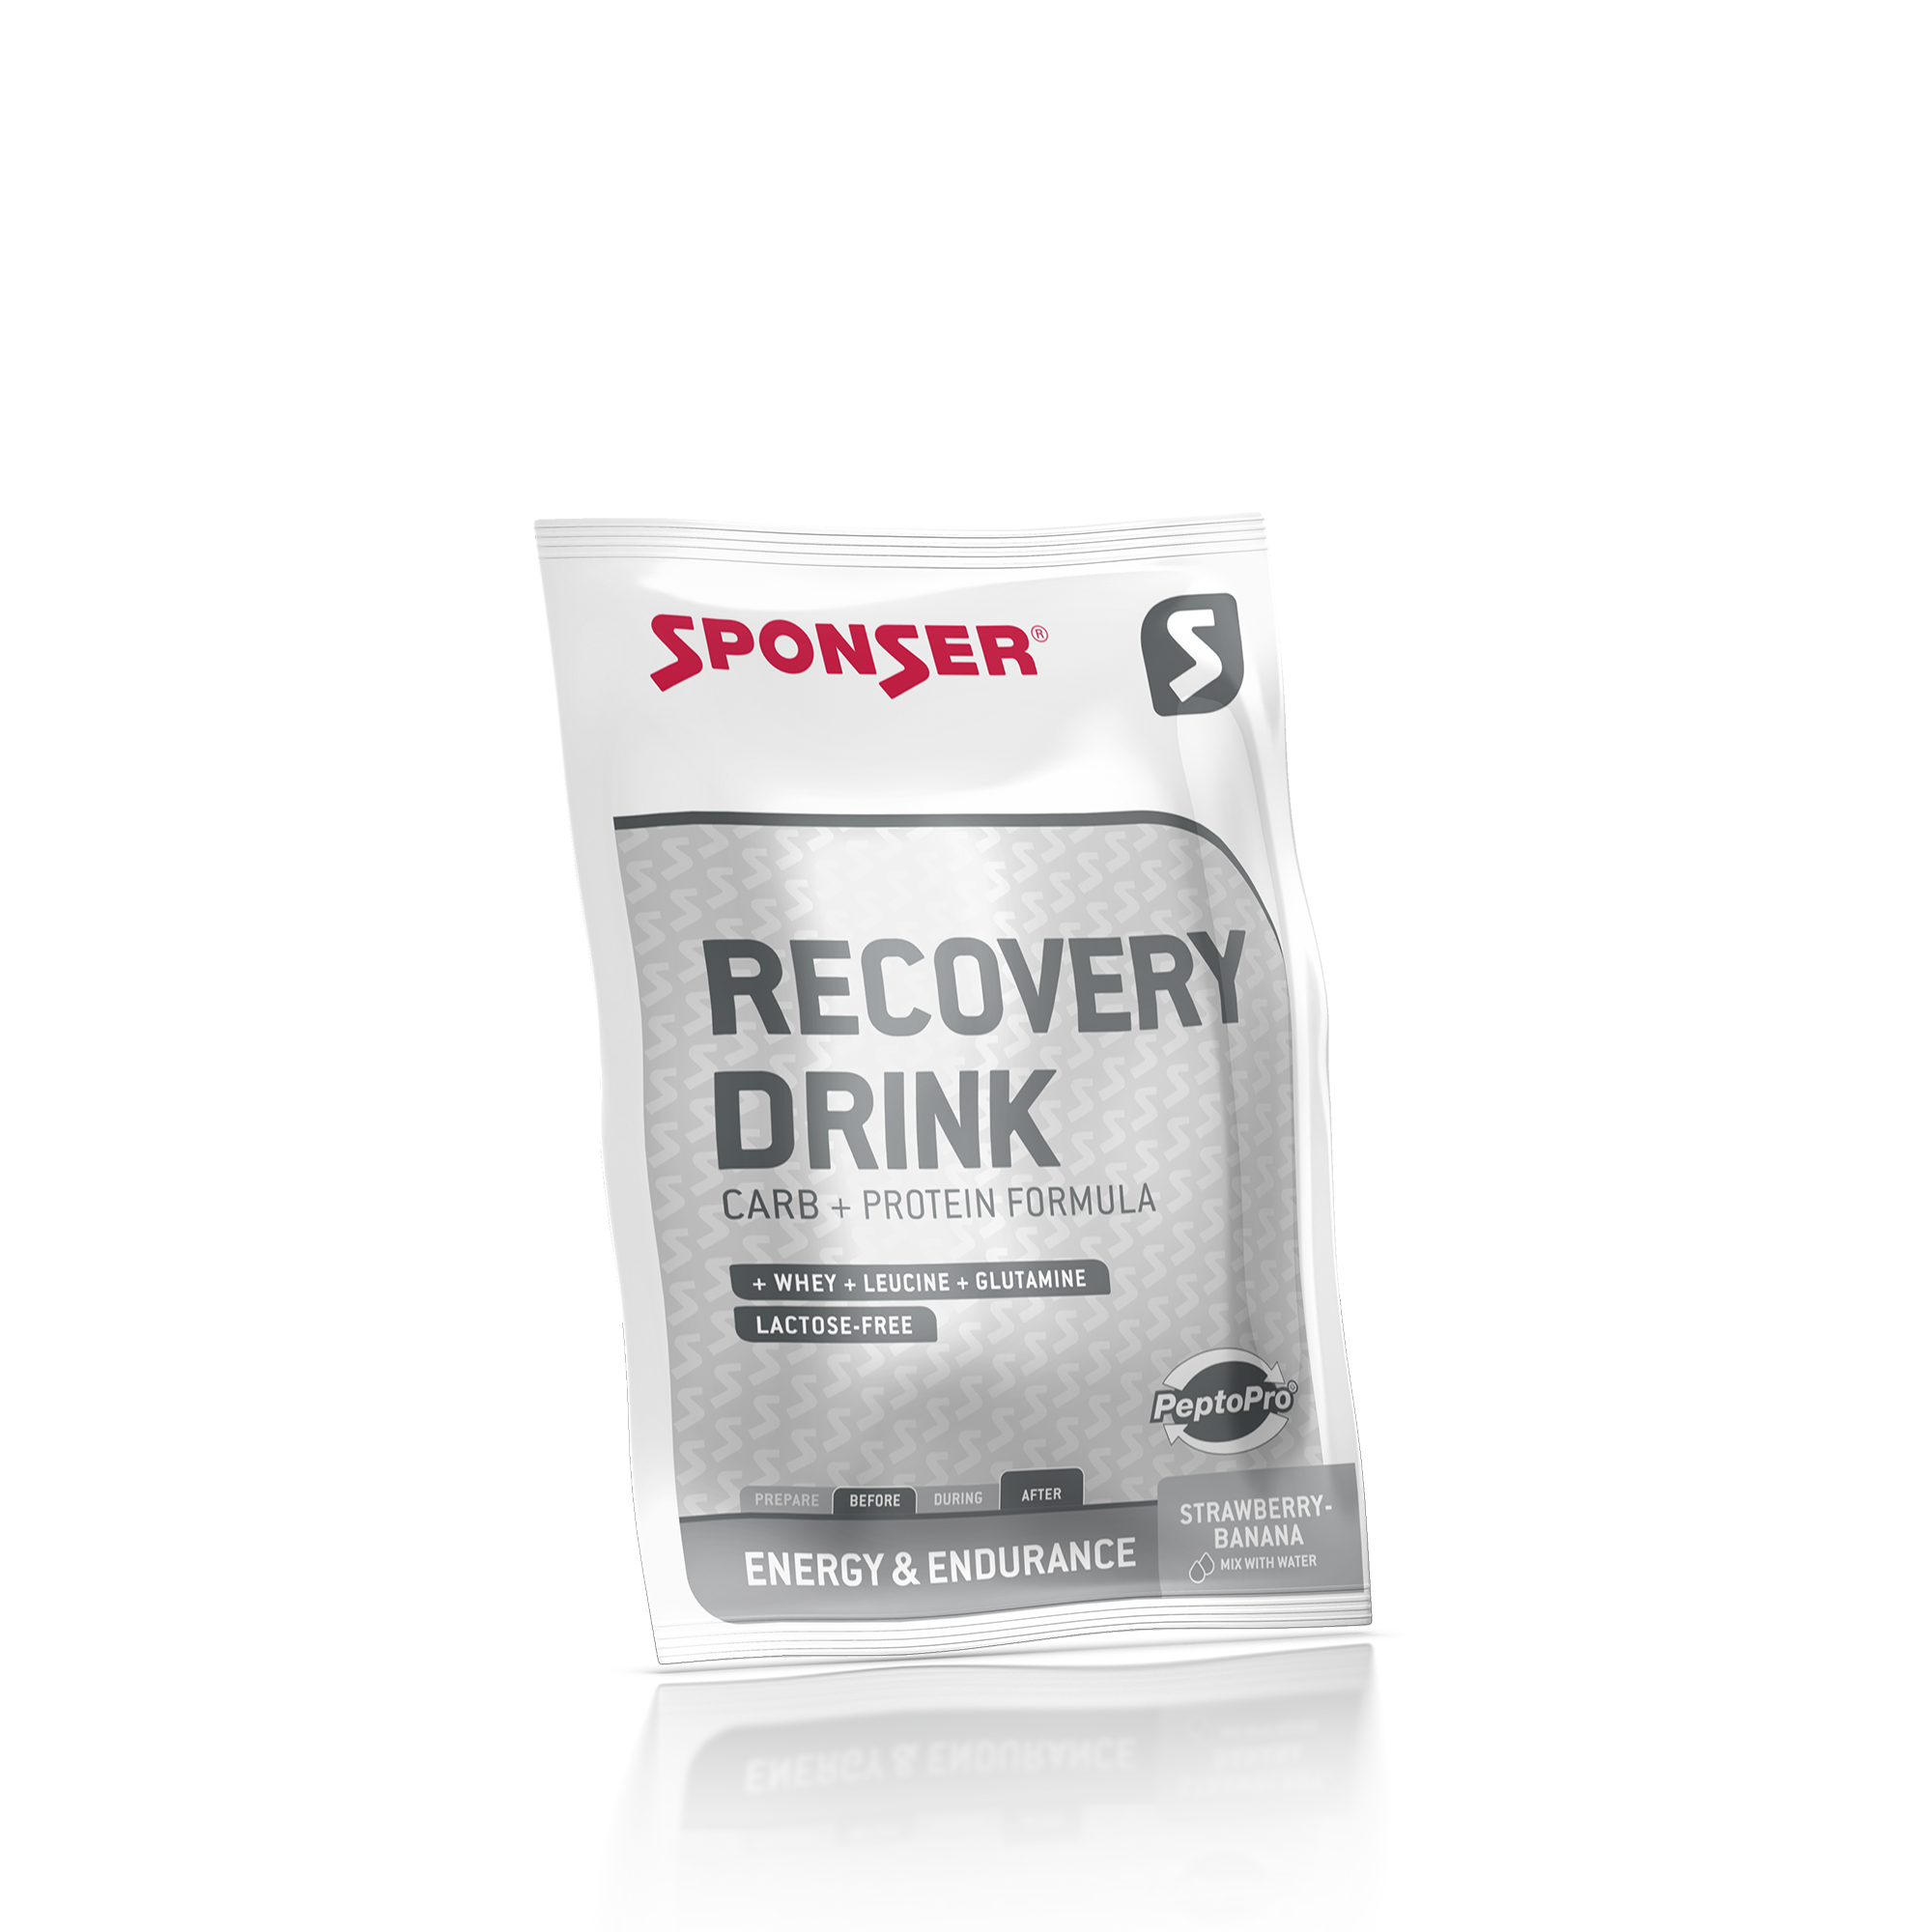 Recovery Drink Carb+Protein formula